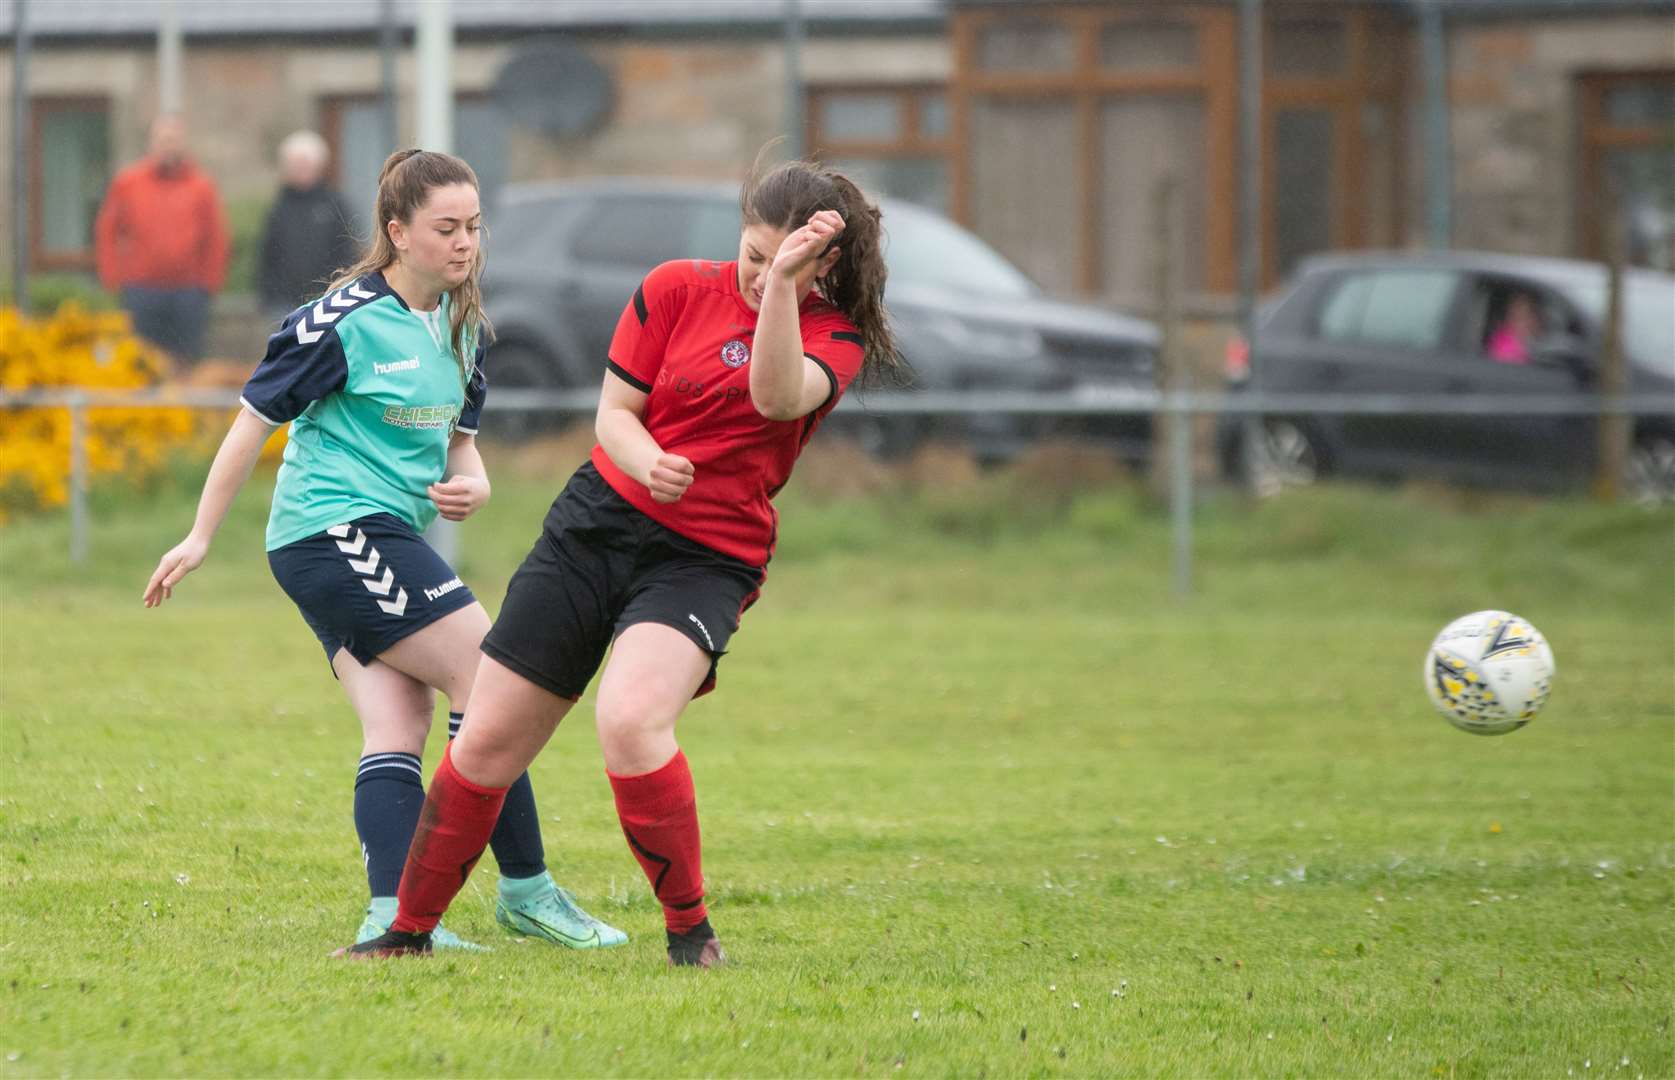 Lori Lappin was on target again for Buckie. Picture: Daniel Forsyth